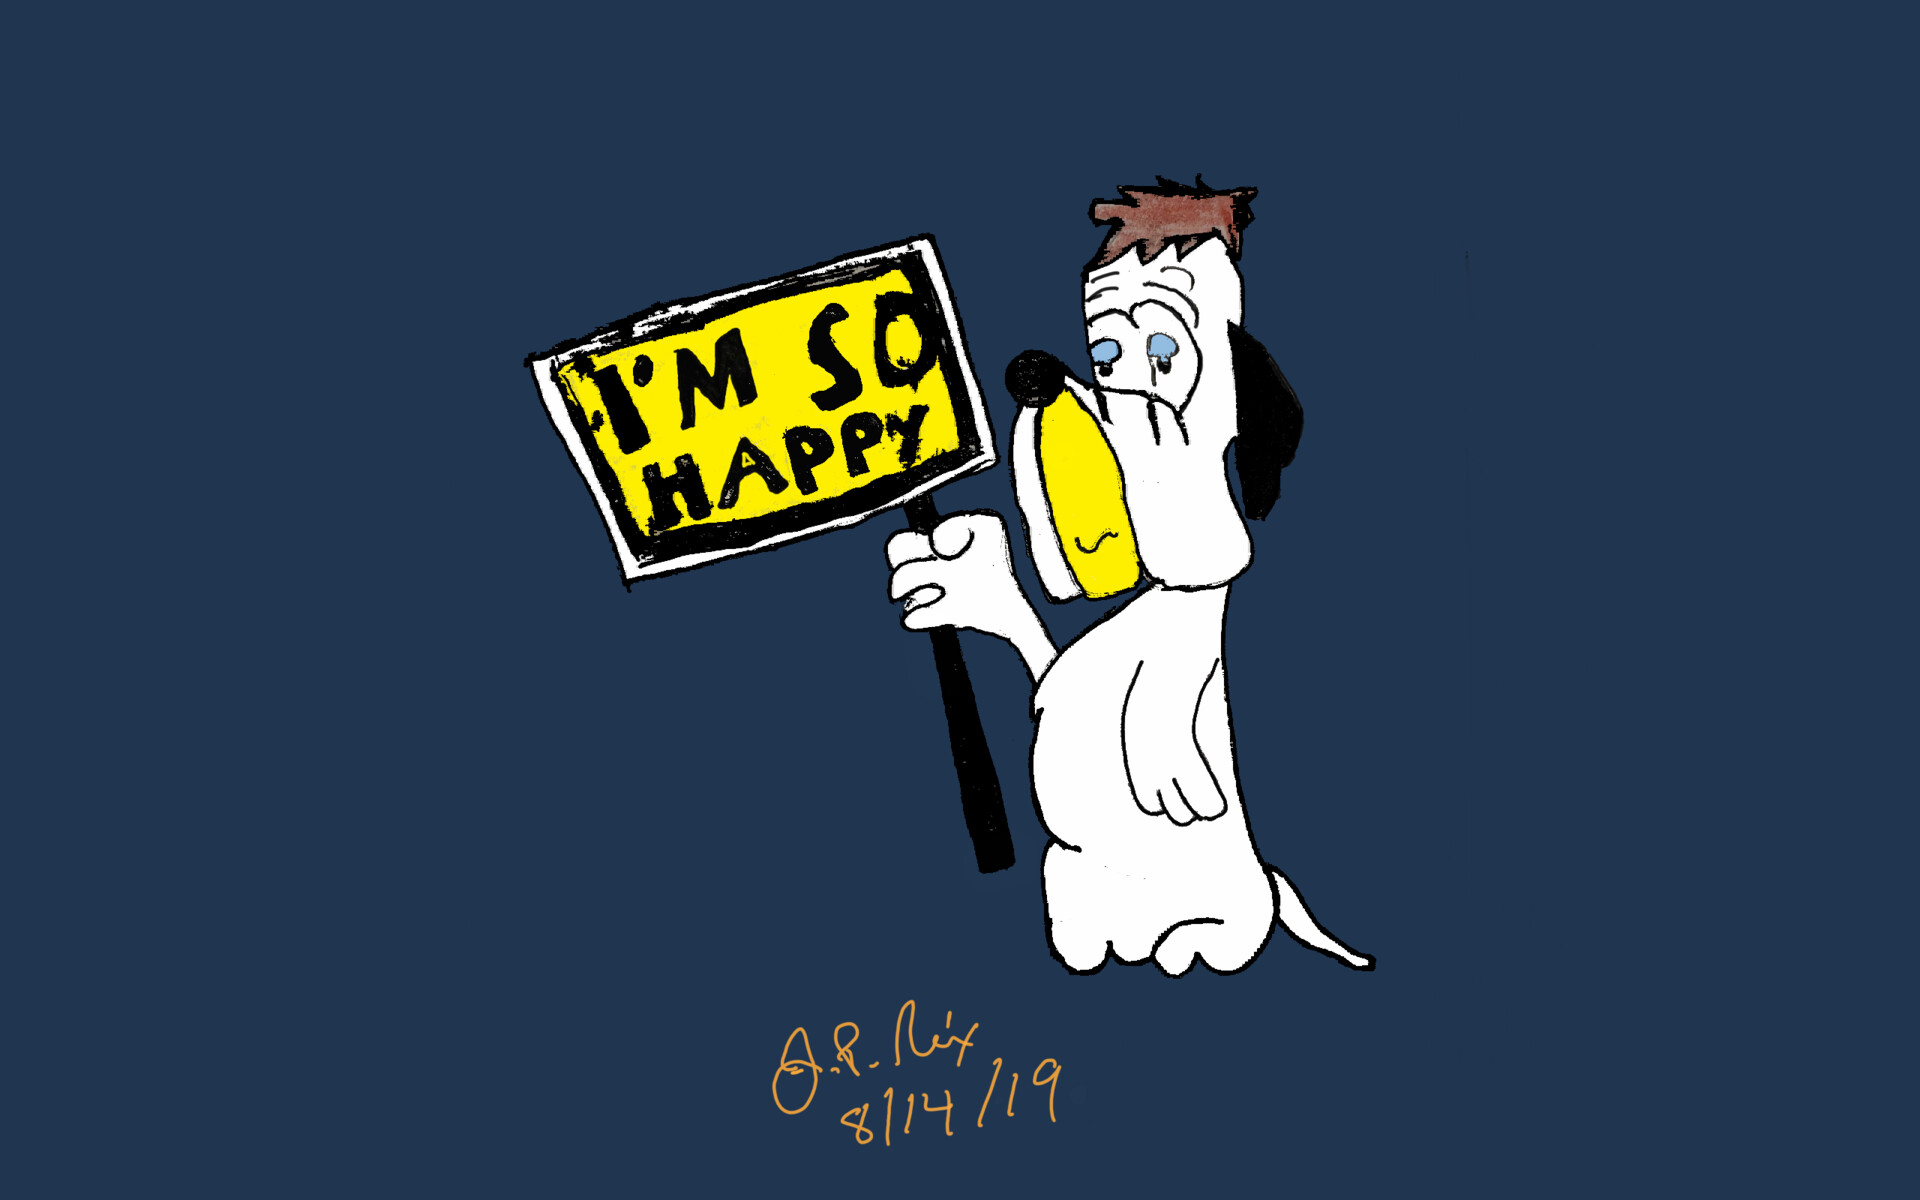 . Nix - Last year's sketch of Droopy Dog now with digital colors